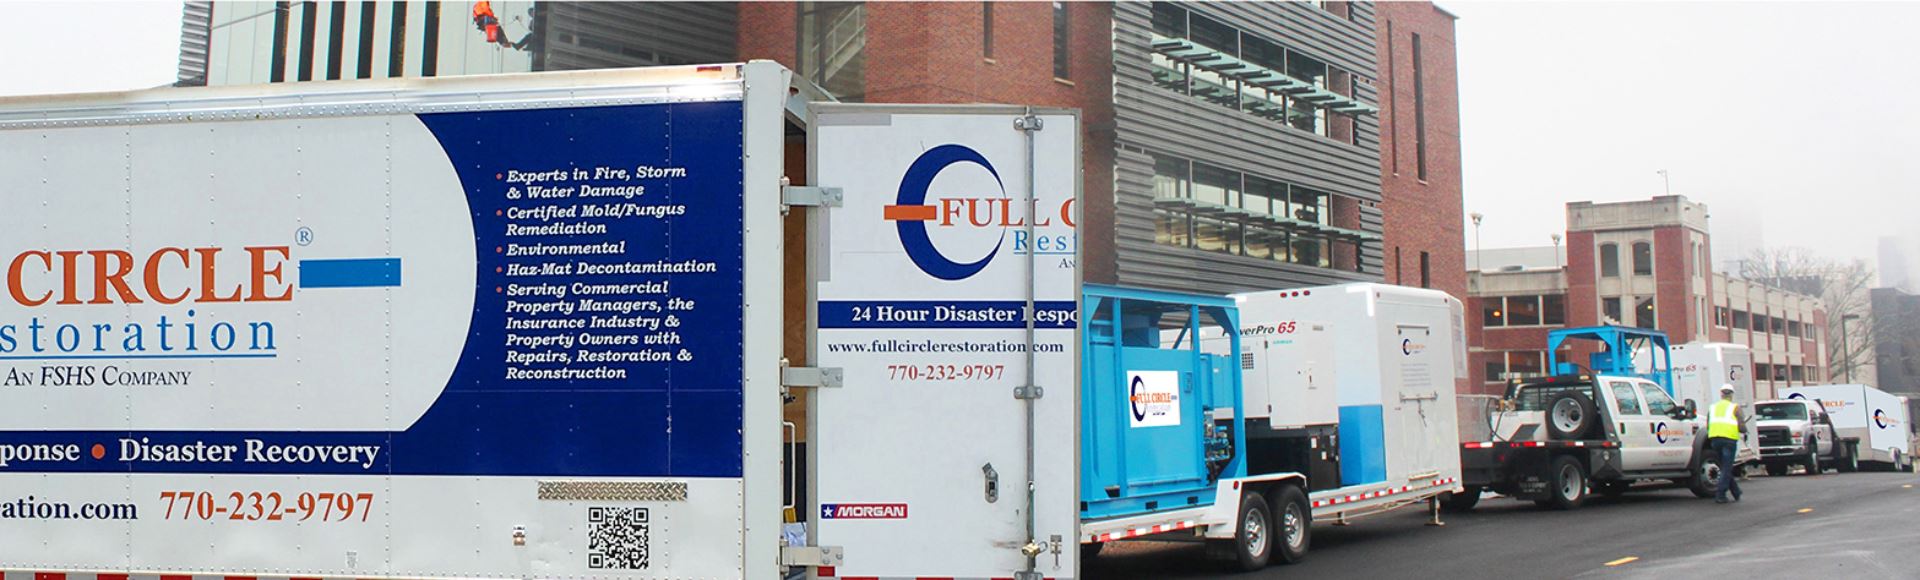 FULL CIRCLE RESTORATION AND CONSTRUCTION SERVICES, INC